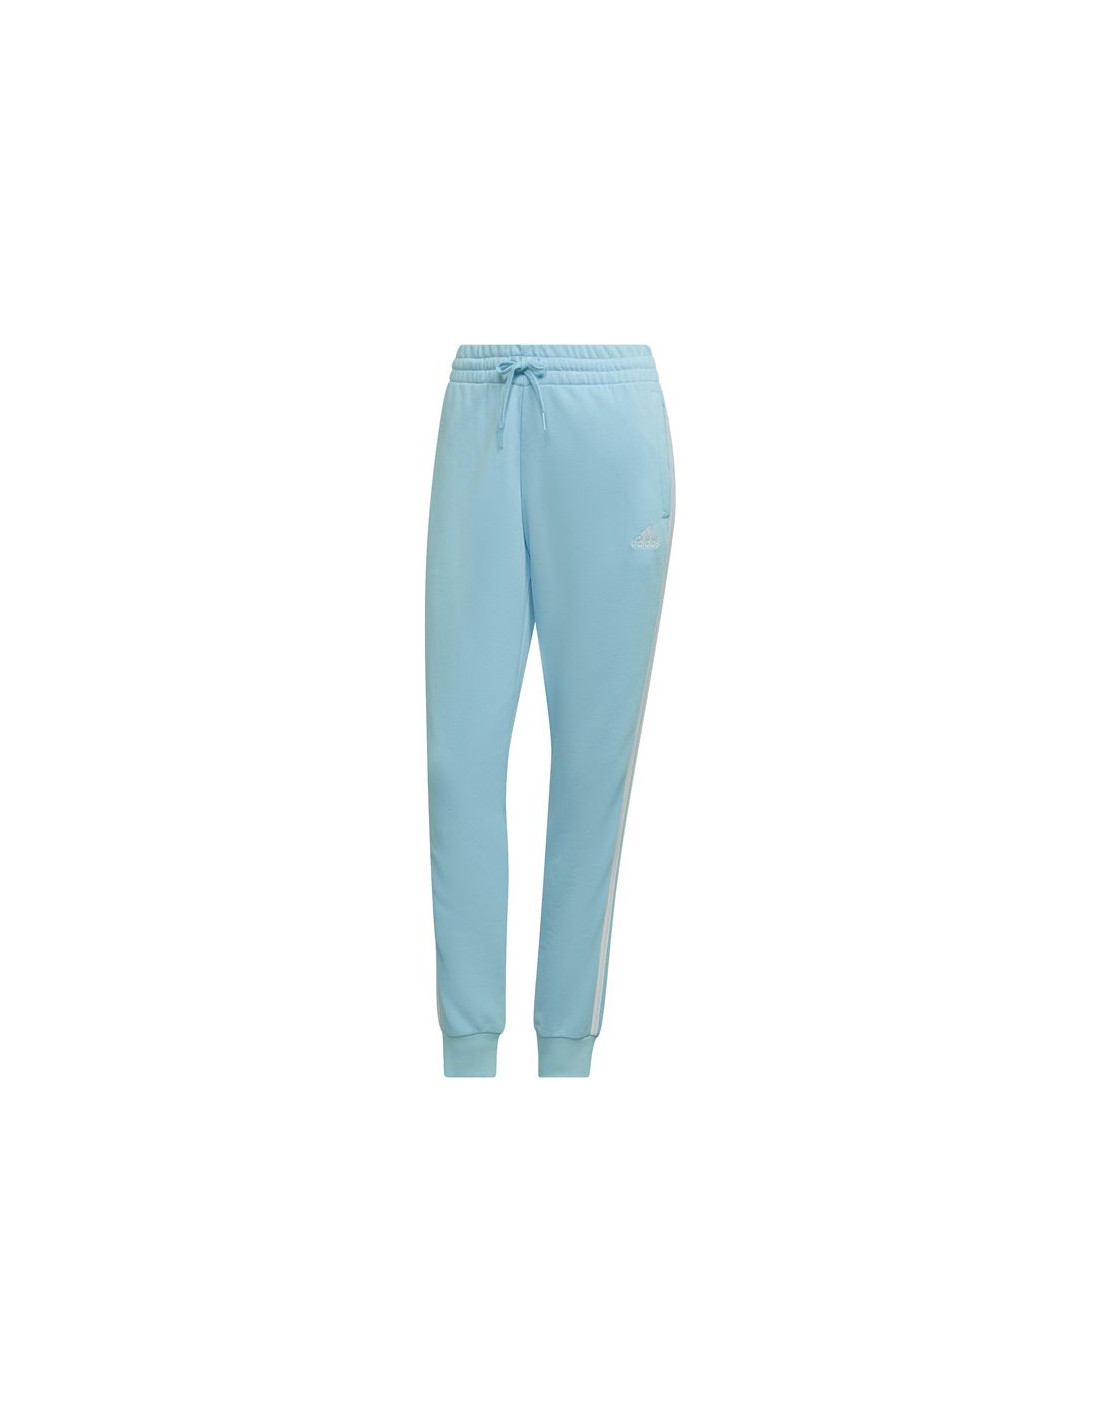 Pantalones adidas essentials french terry mujer blue